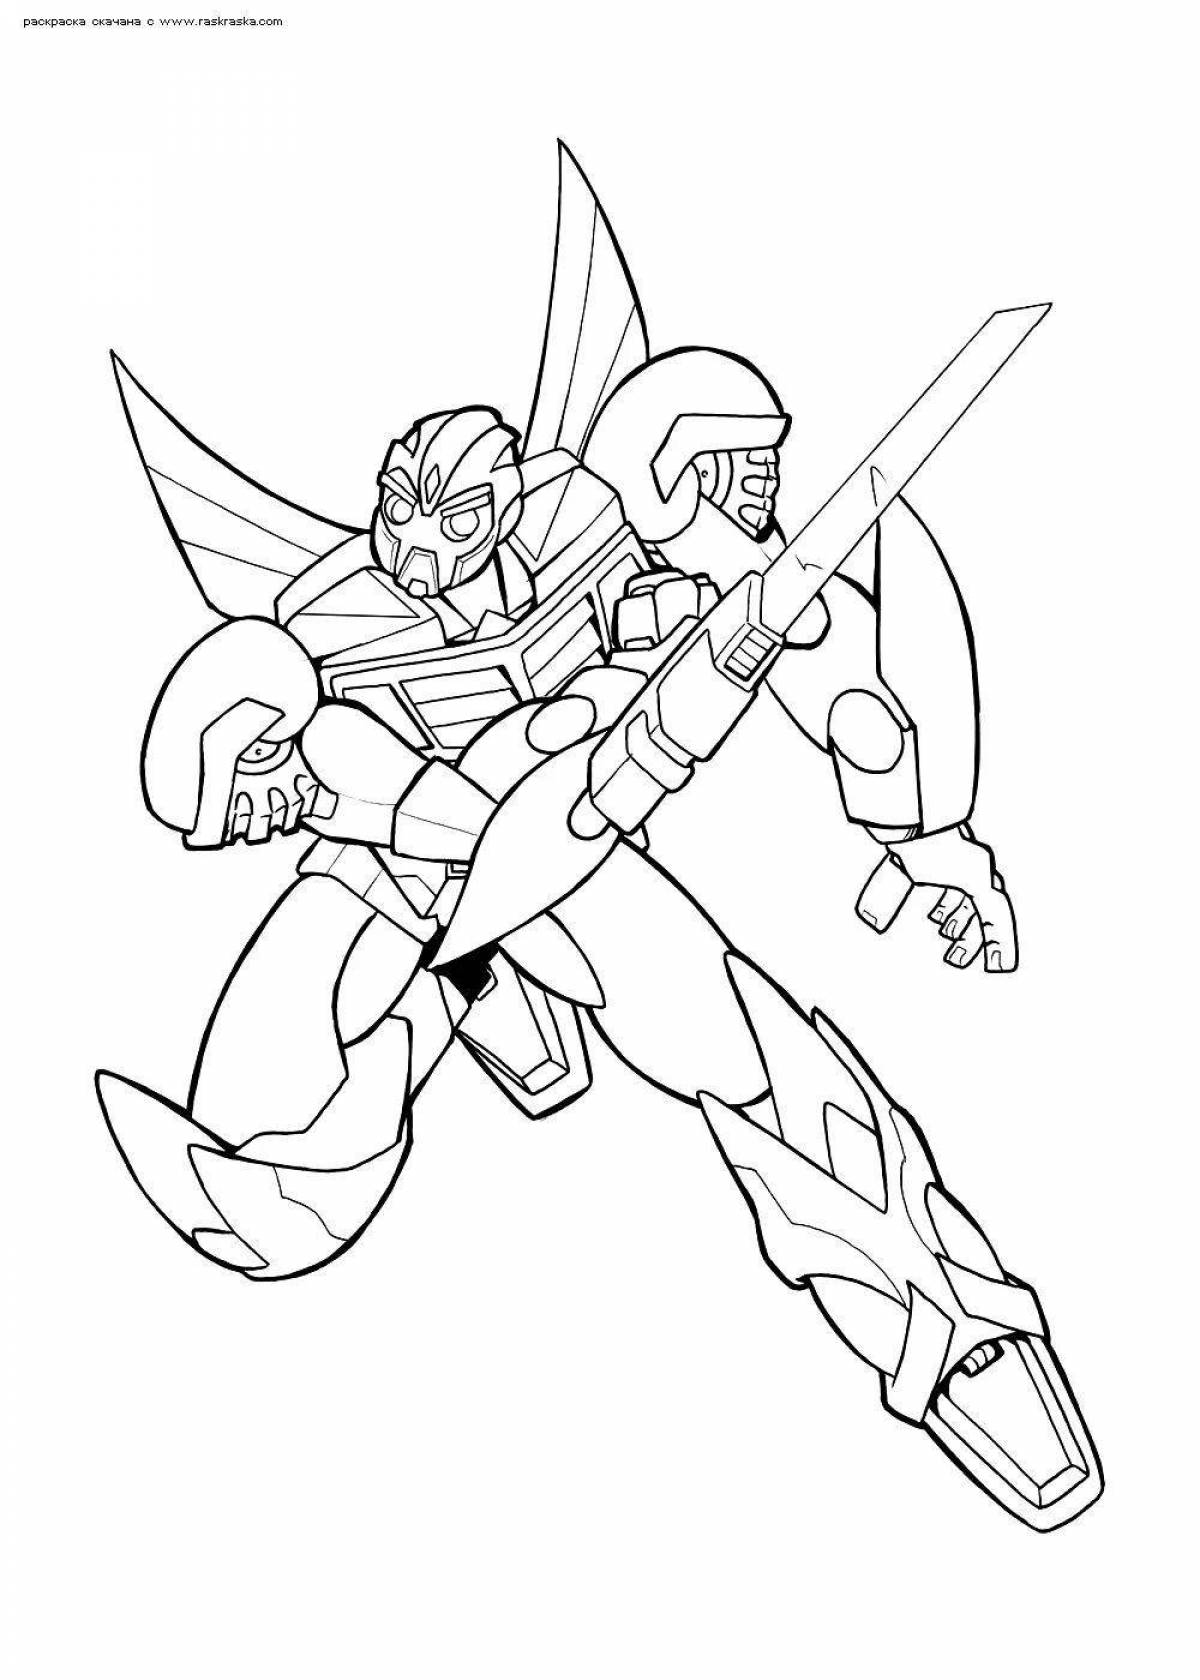 Crunchy bumblebee coloring page